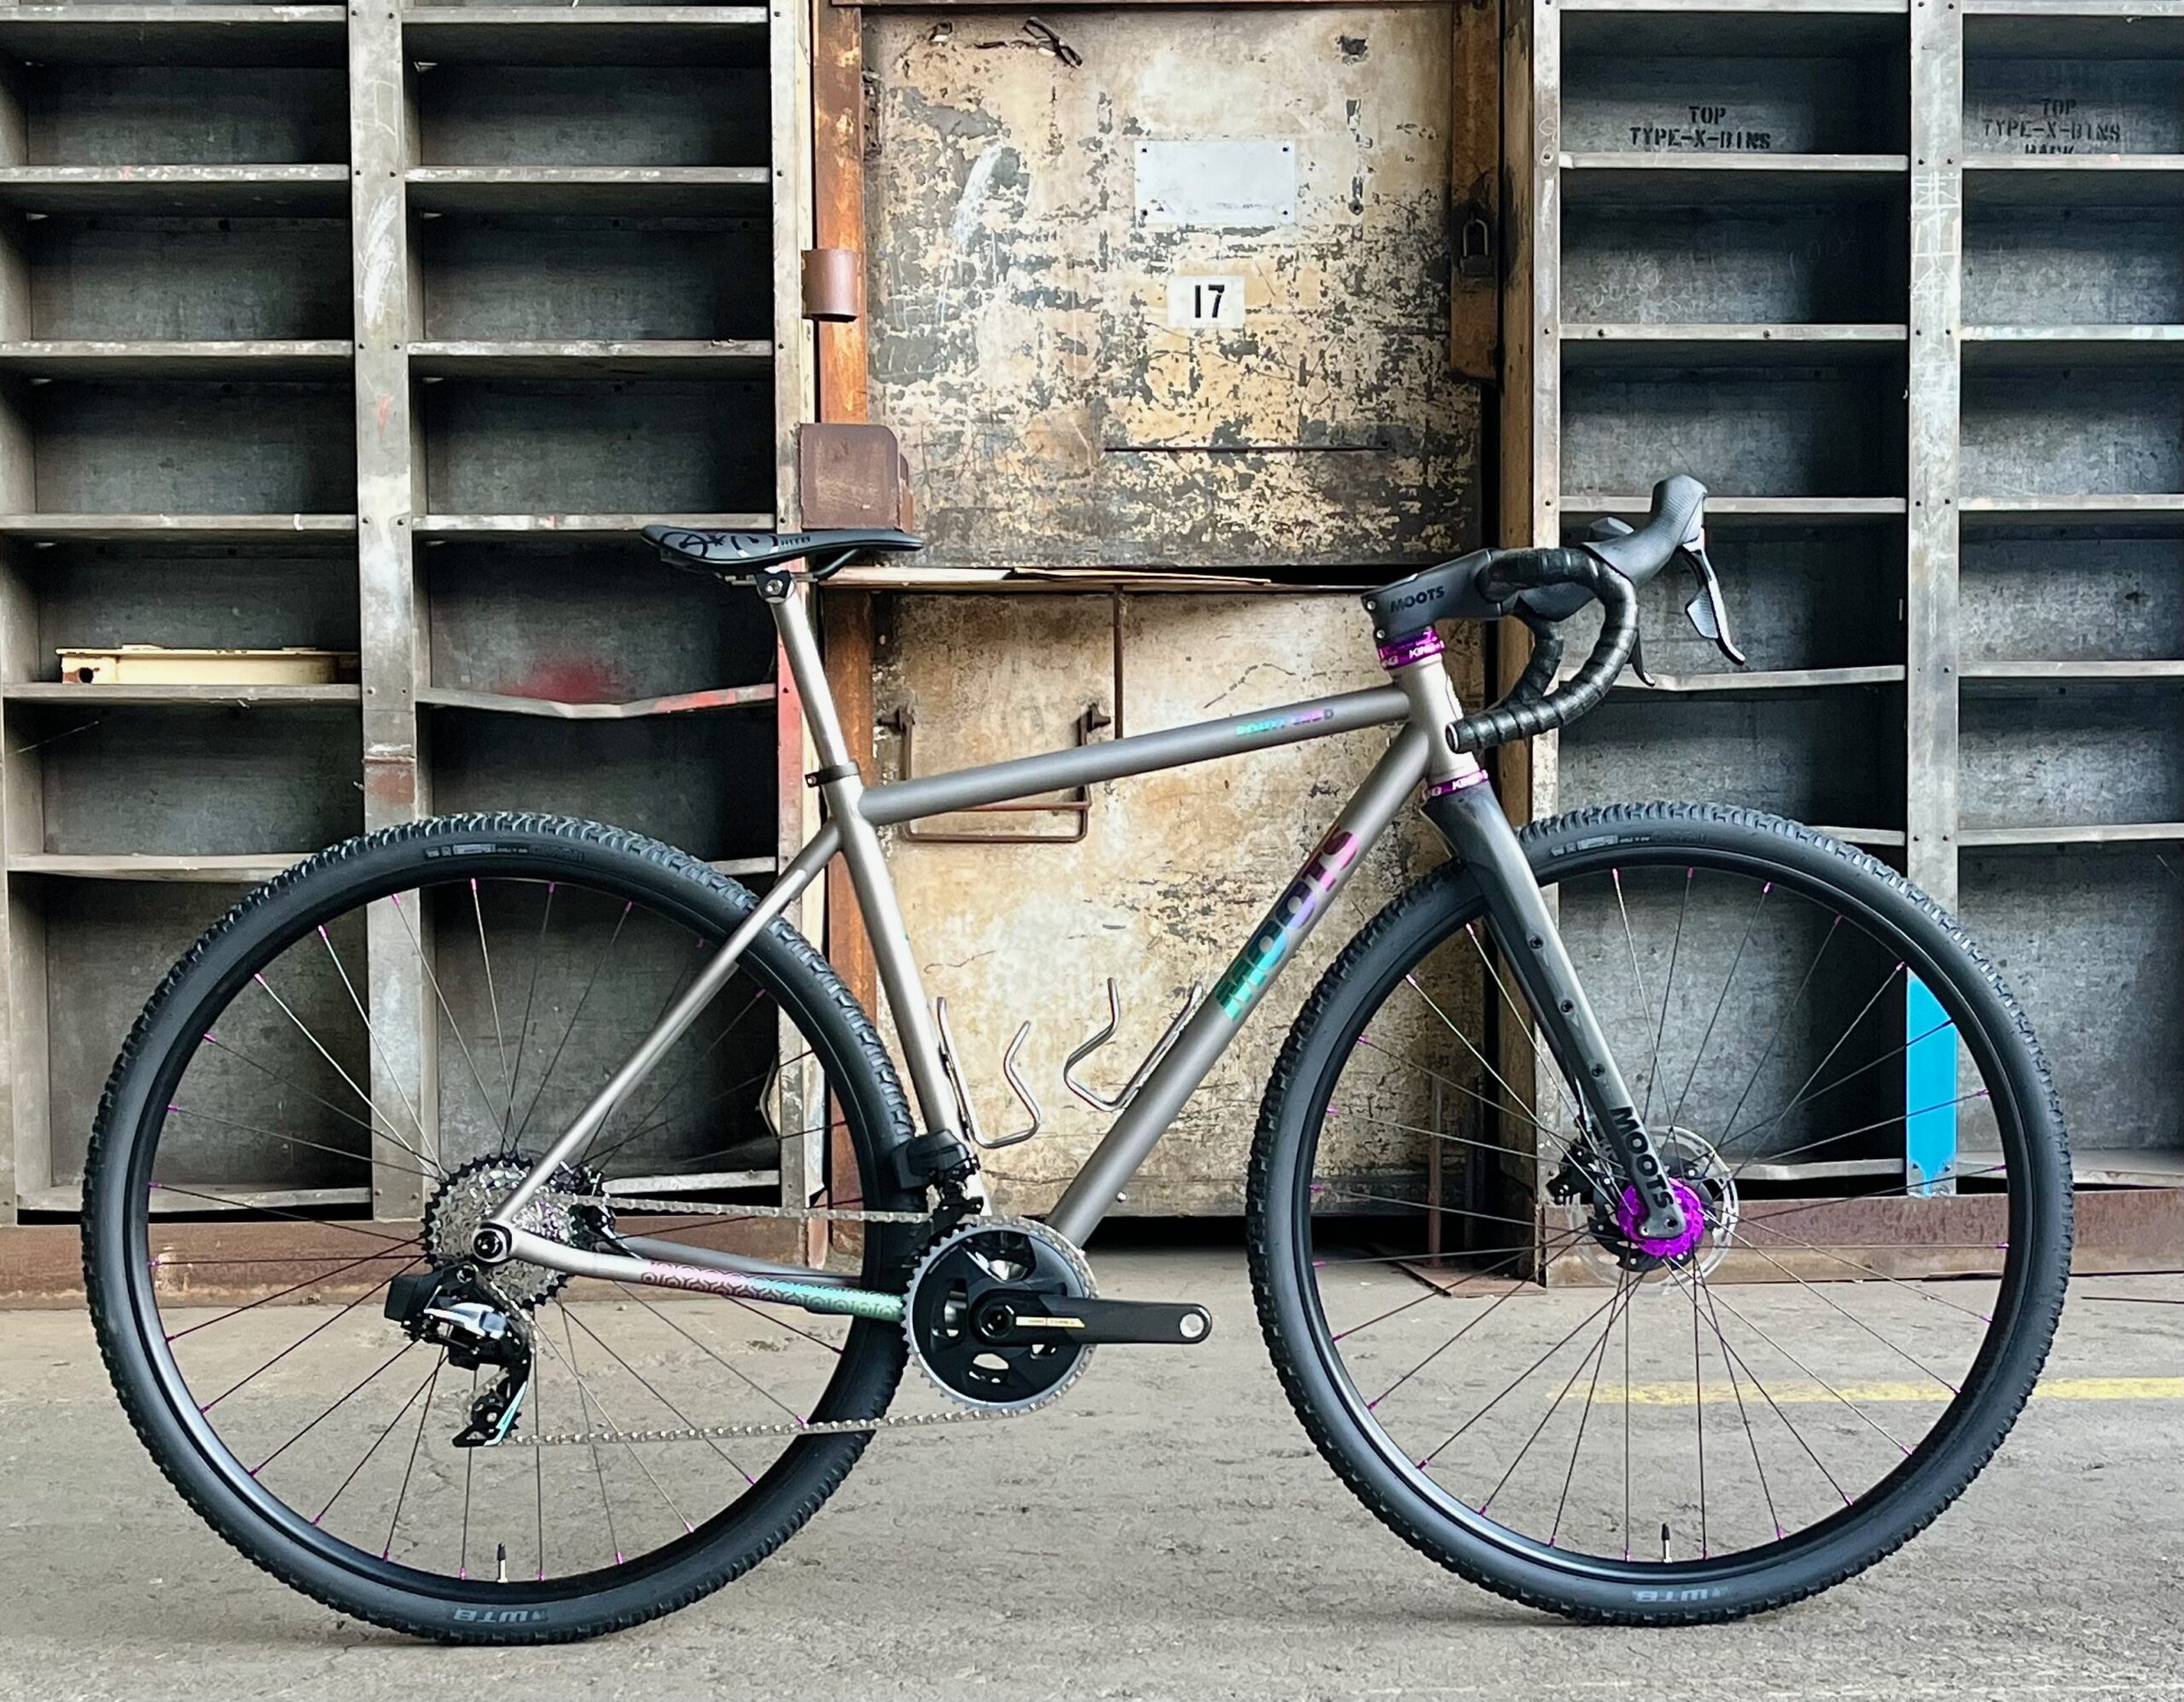 Moots CRDD prototype with 750D wheels and tires